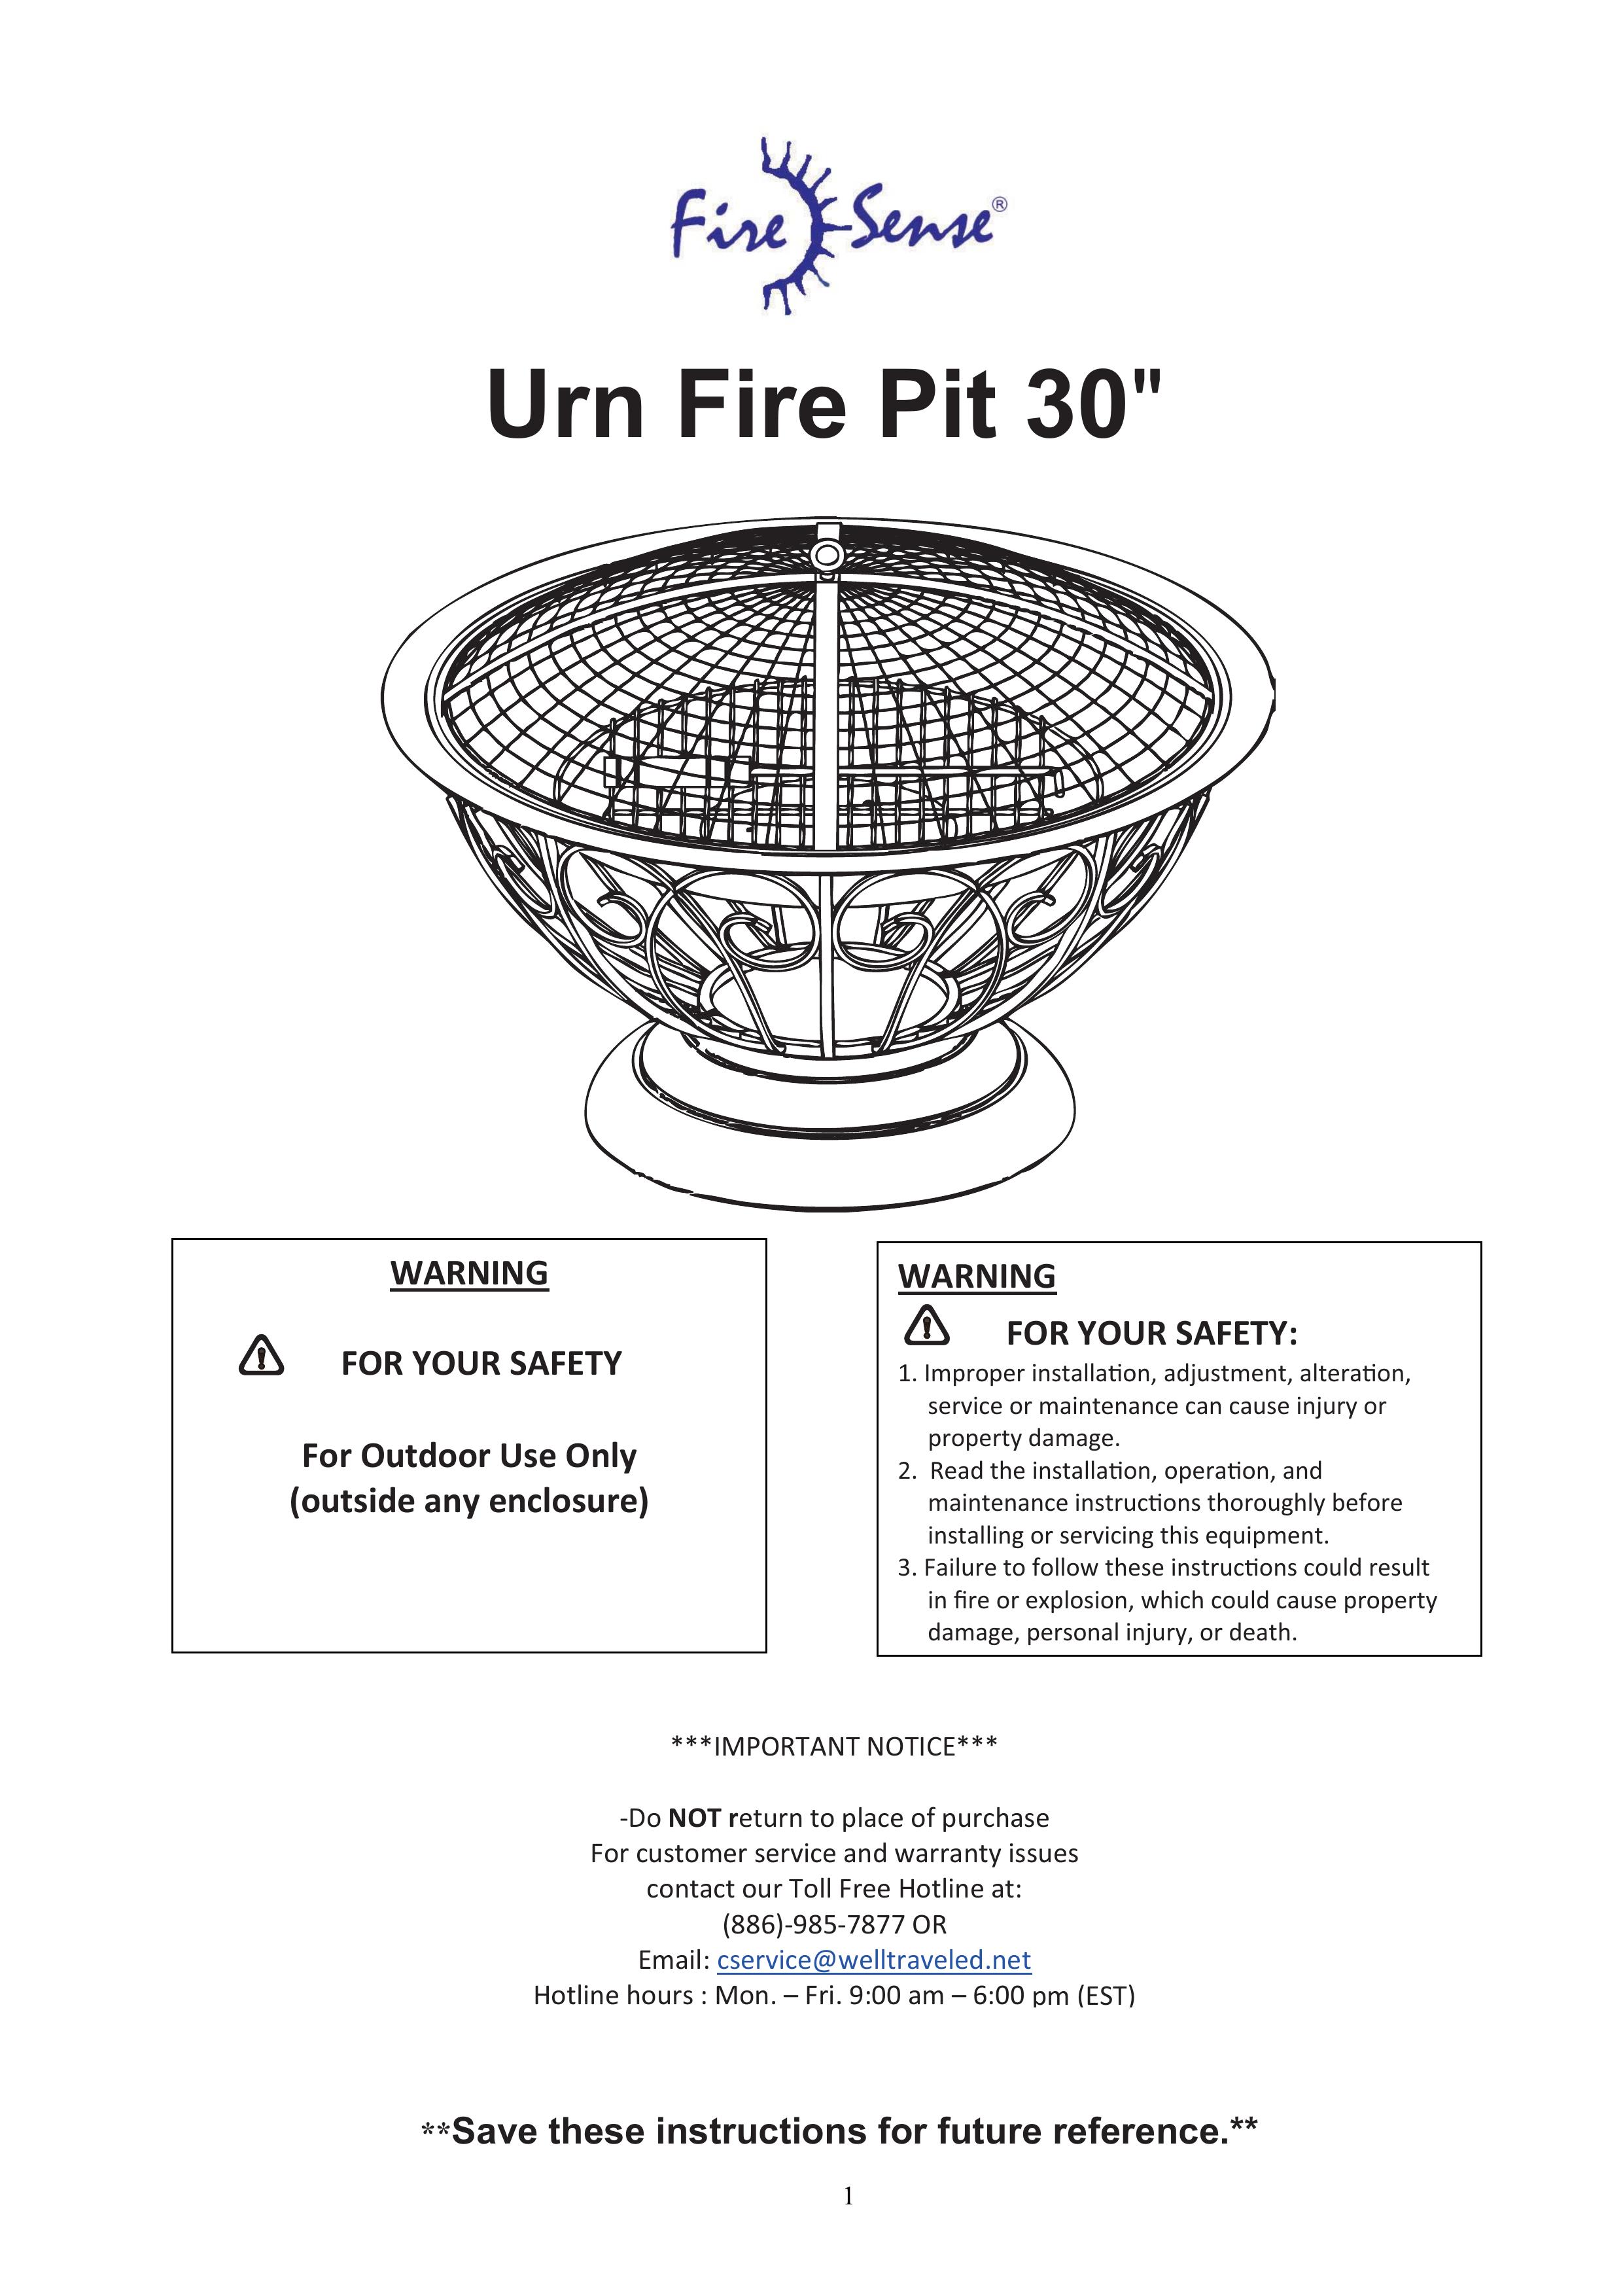 Well Traveled Living Urn Fire Pit User Manual